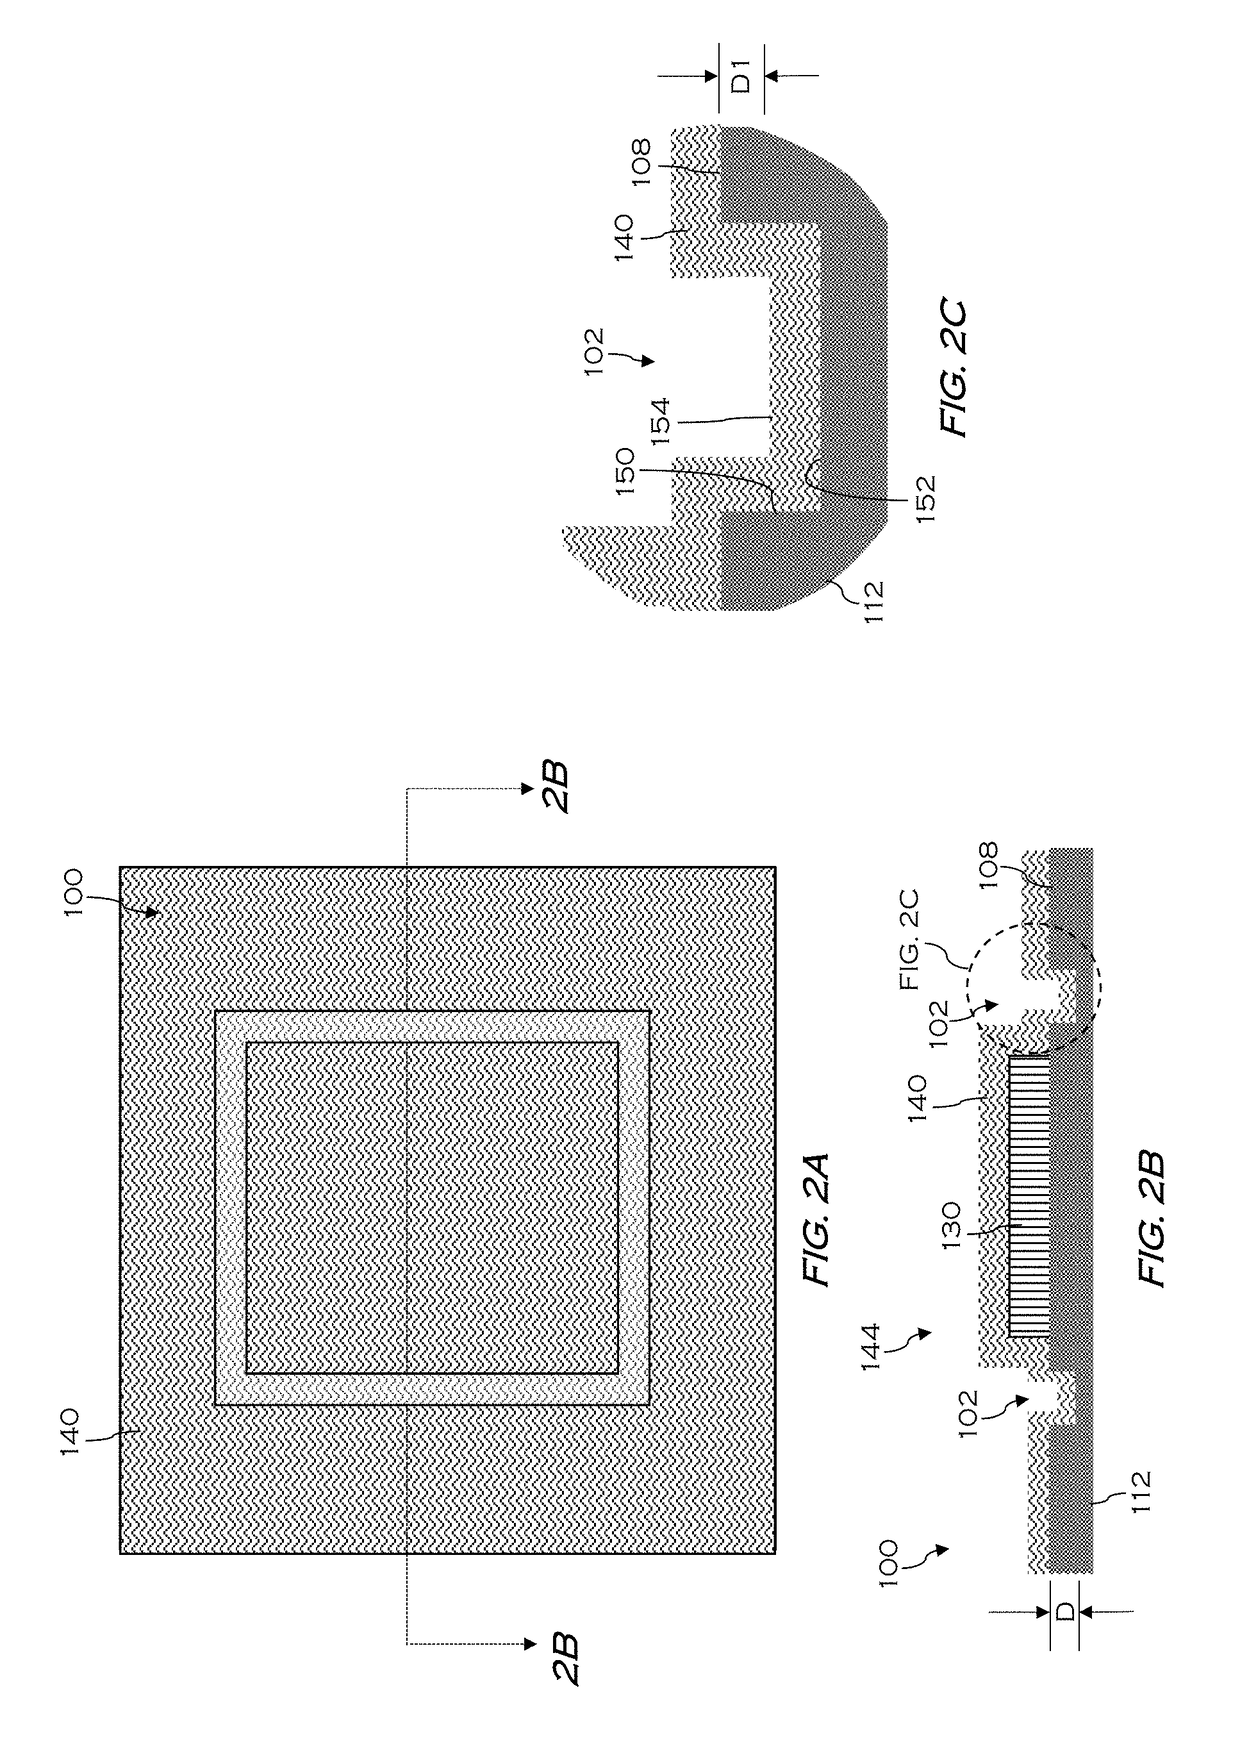 Energy storage device with encapsulation anchoring